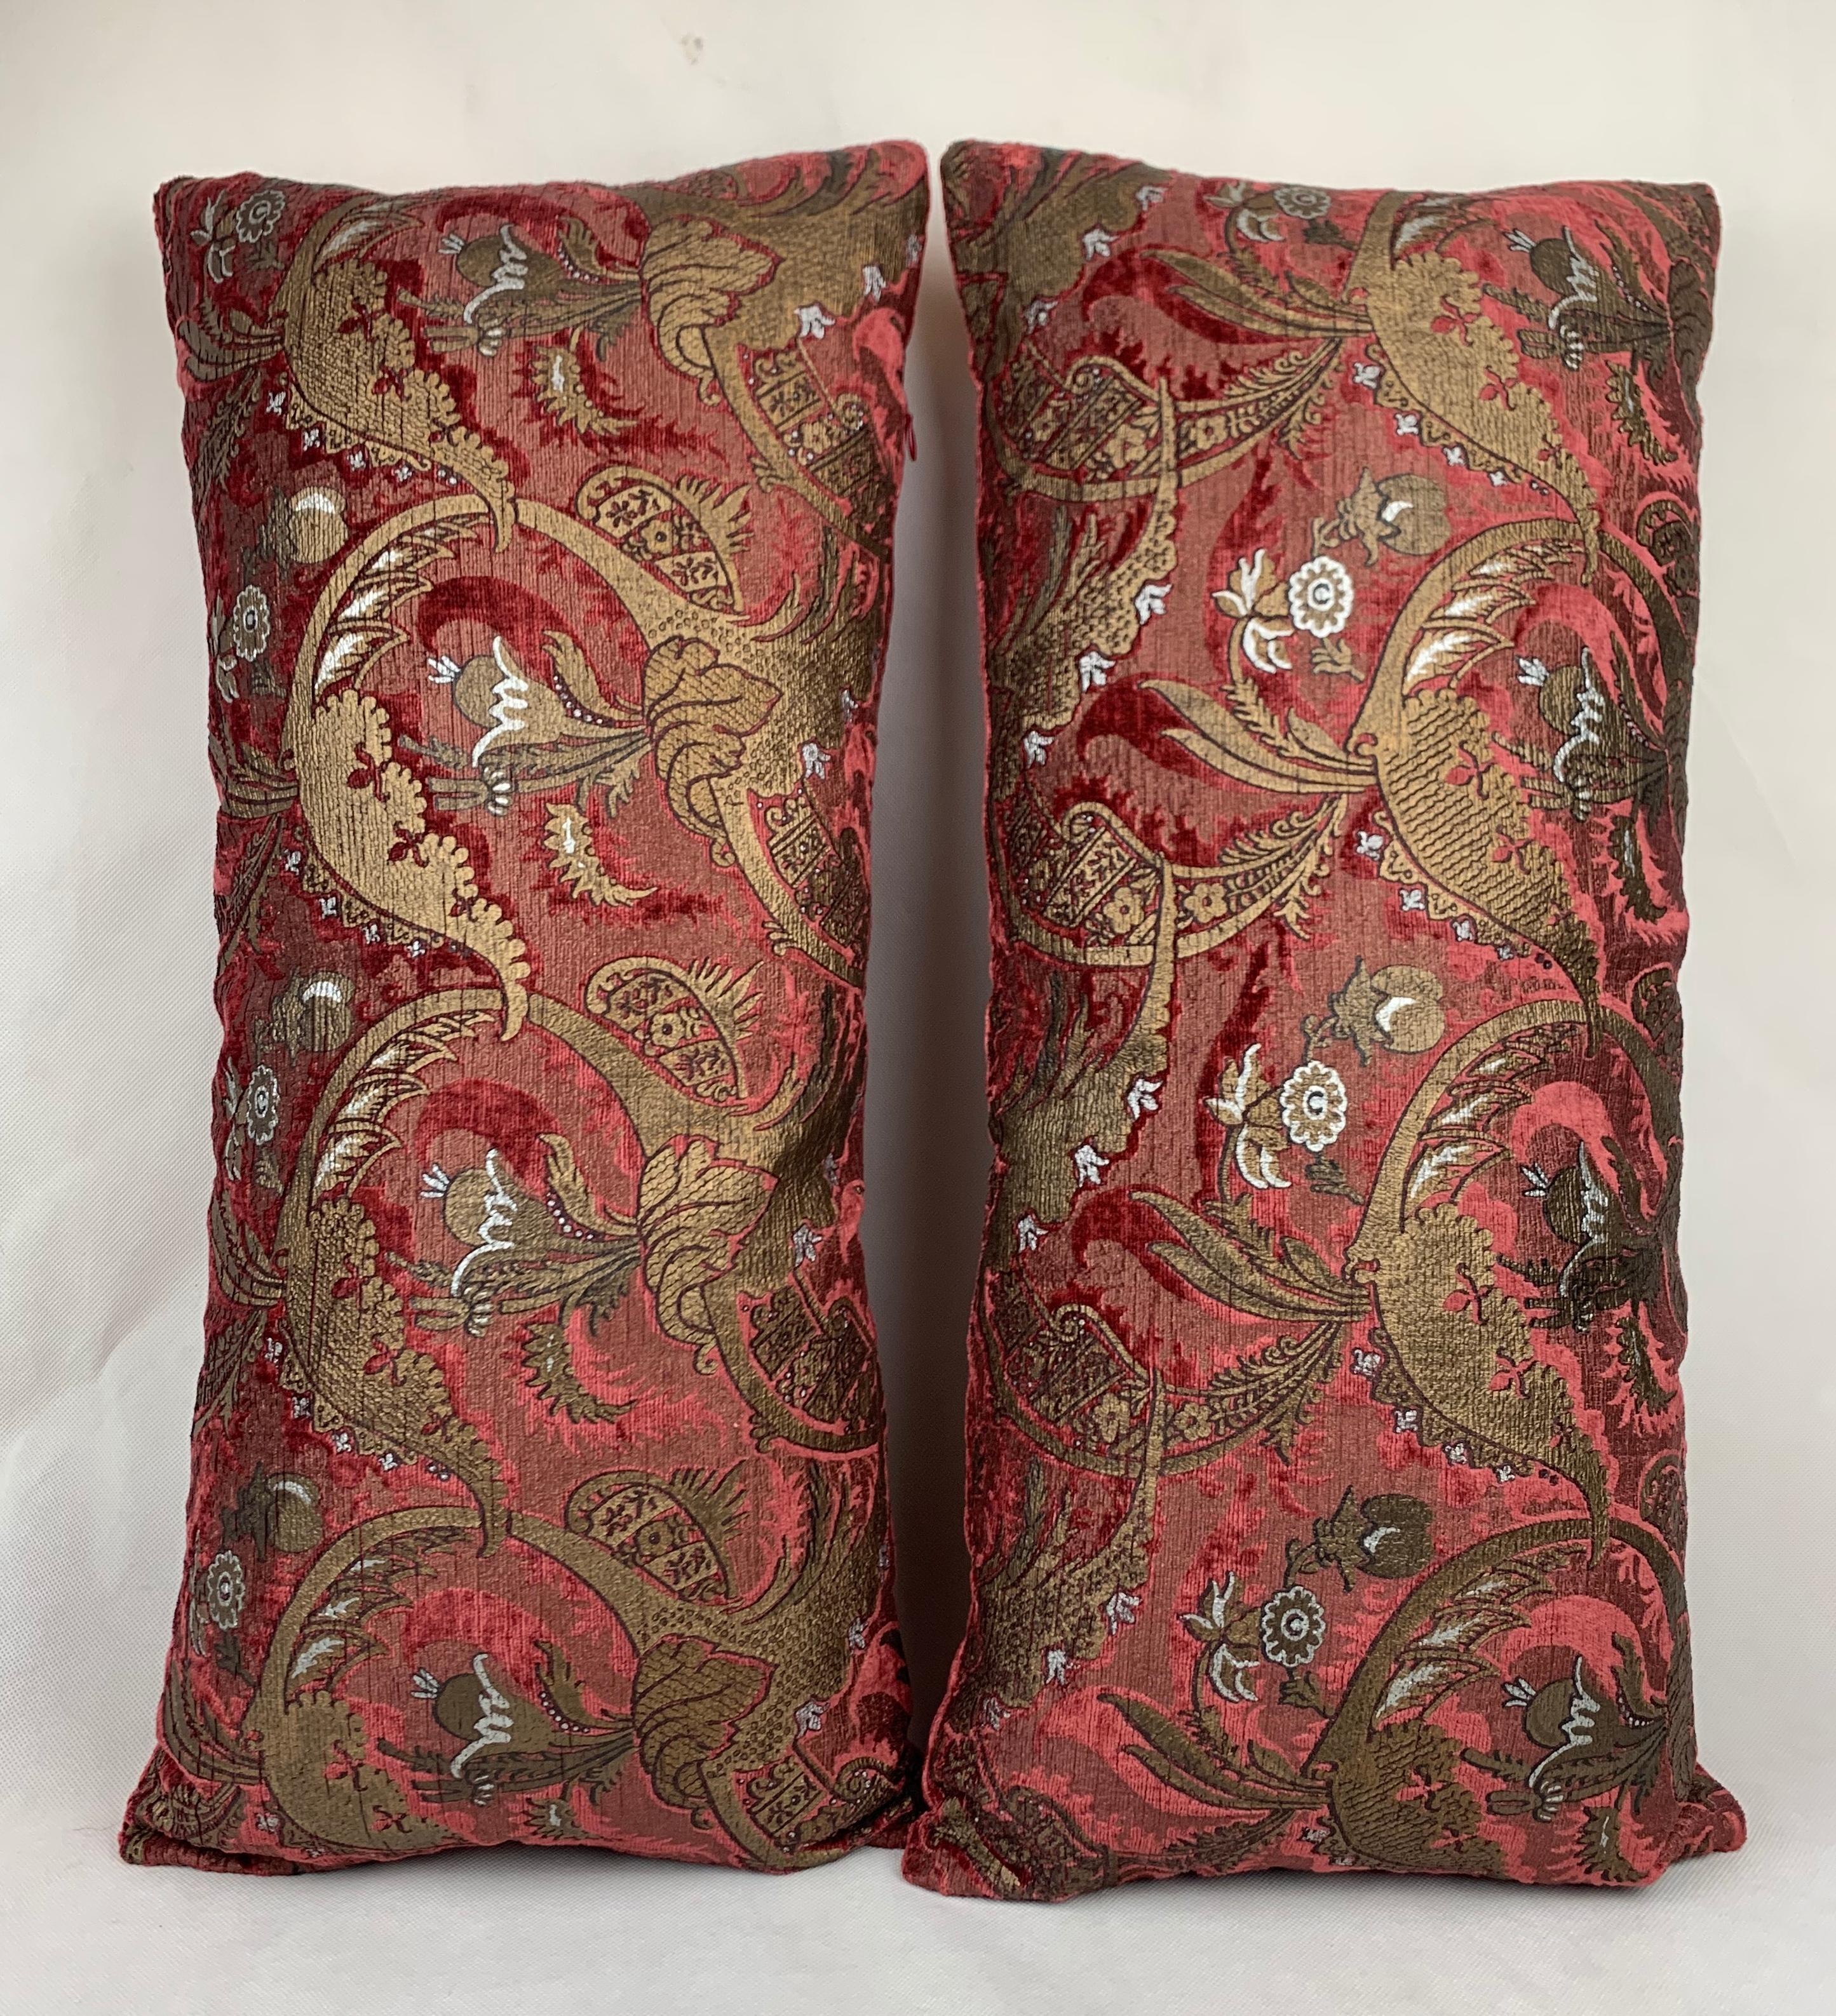 Pair of red and gold oblong printed velvet cushions by Venetia Studium in the 